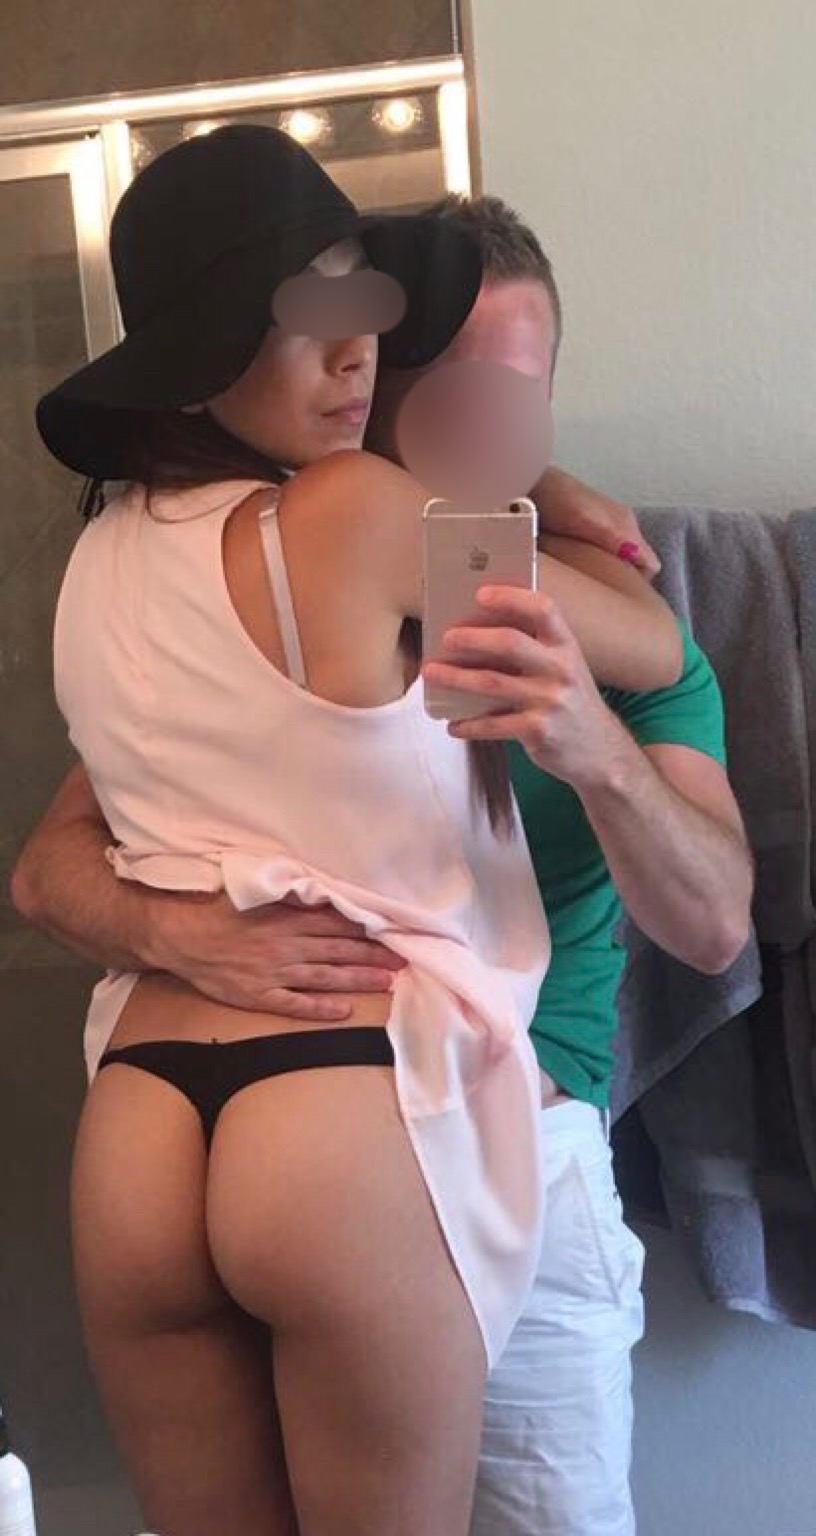 Wife and friend at it again. He asked she keep the hat on while she gave him a blowjob.